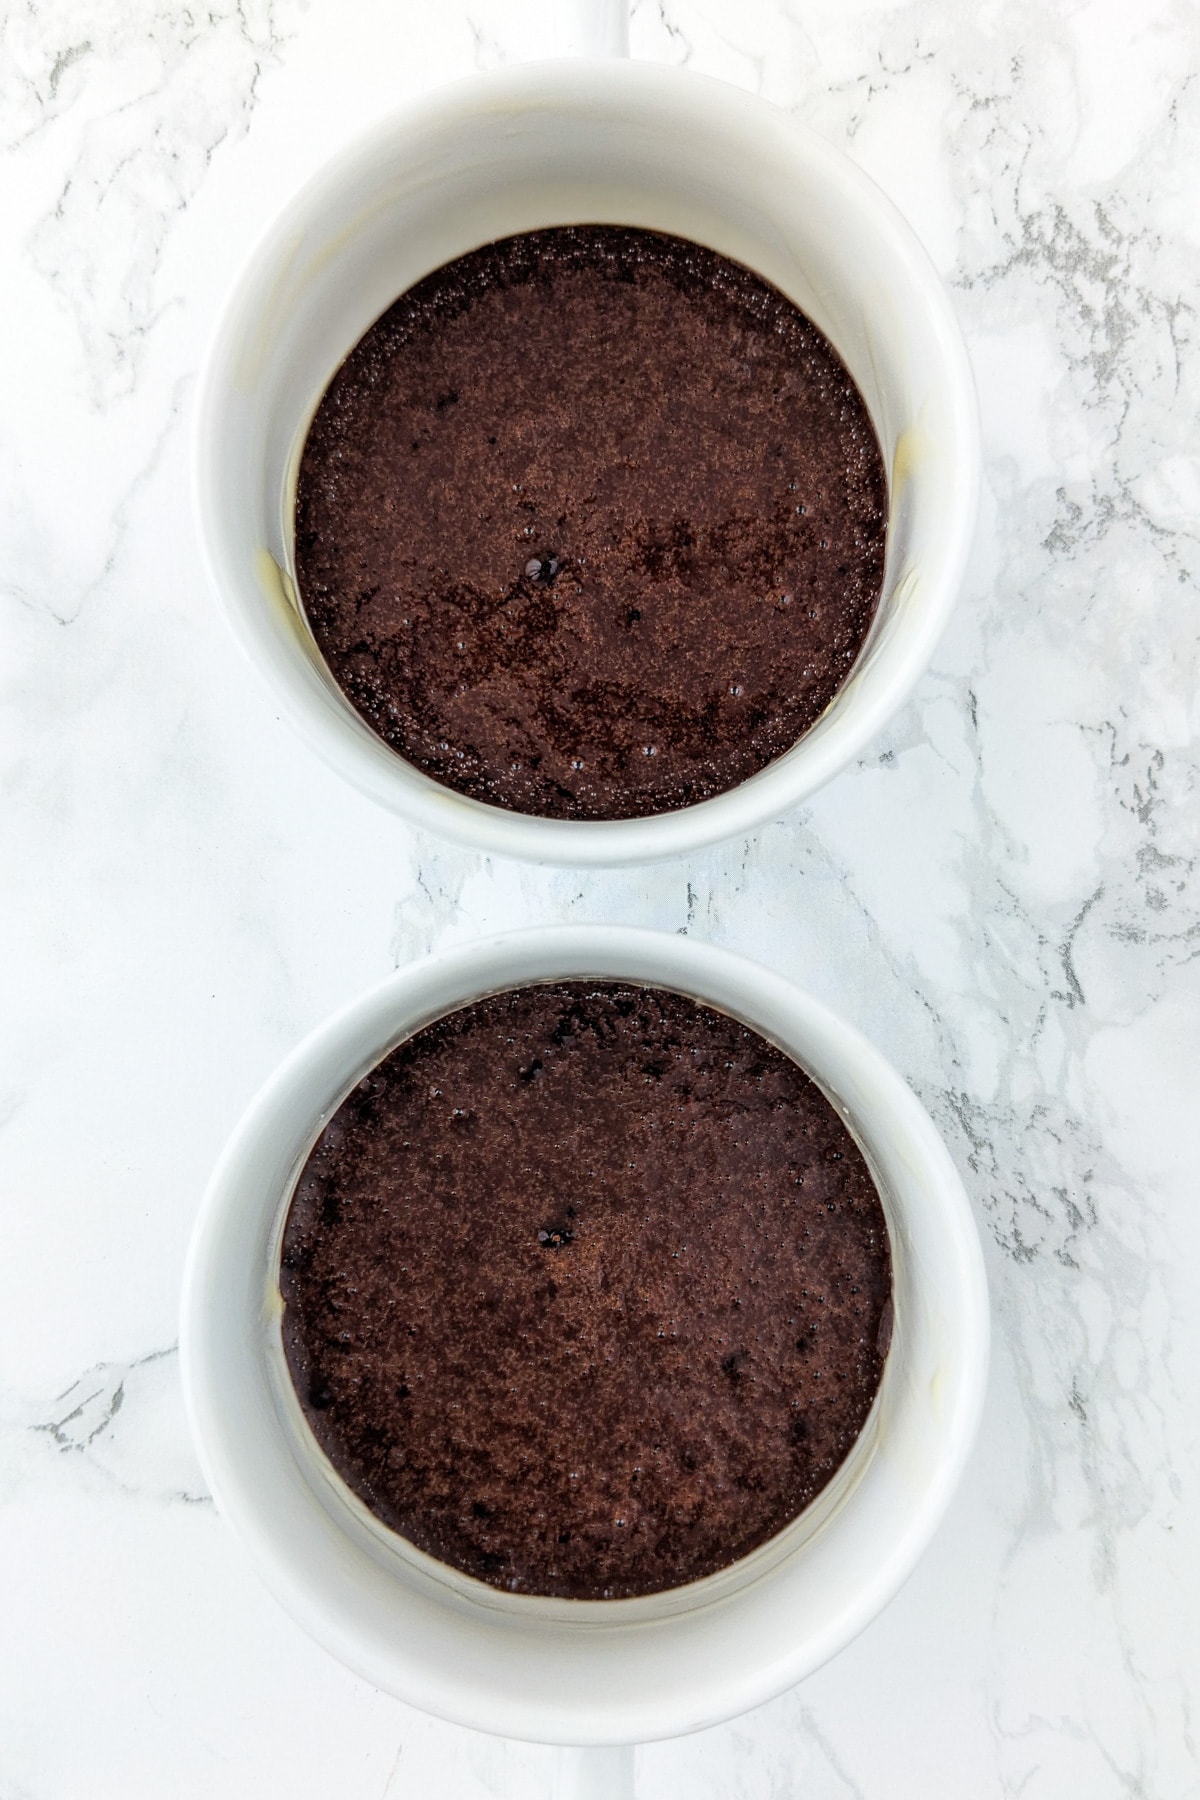 Top view of 2 mugs with chocolate cake baked in the microwave.